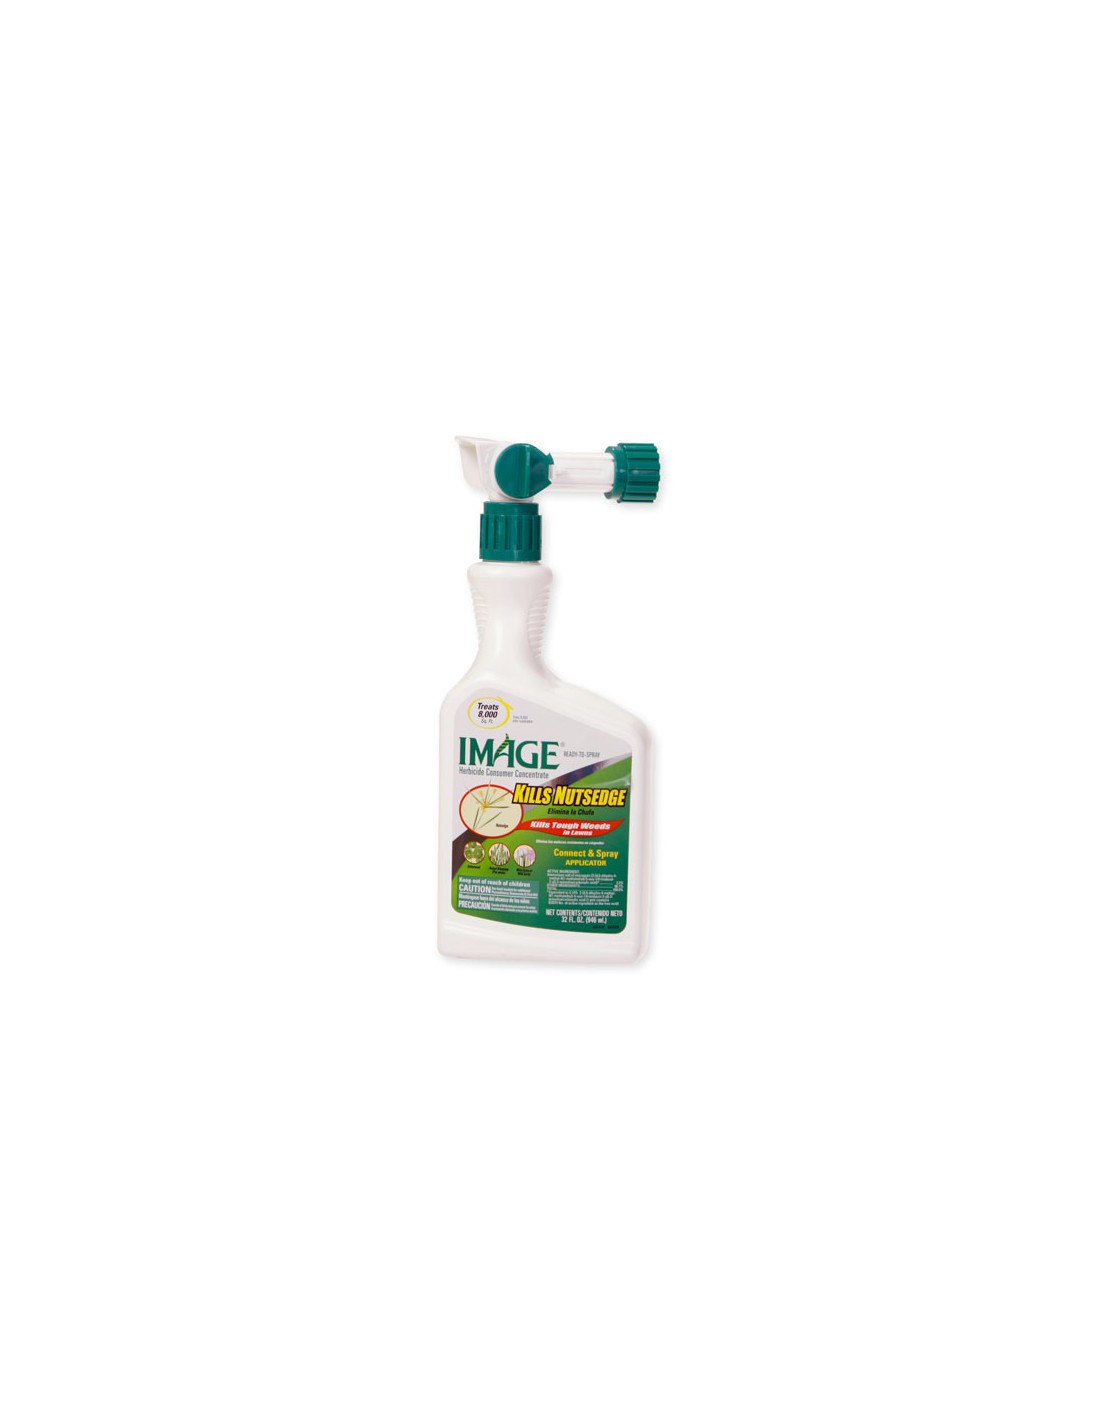 Use in flower bed, but not spray directly on rose bushes?